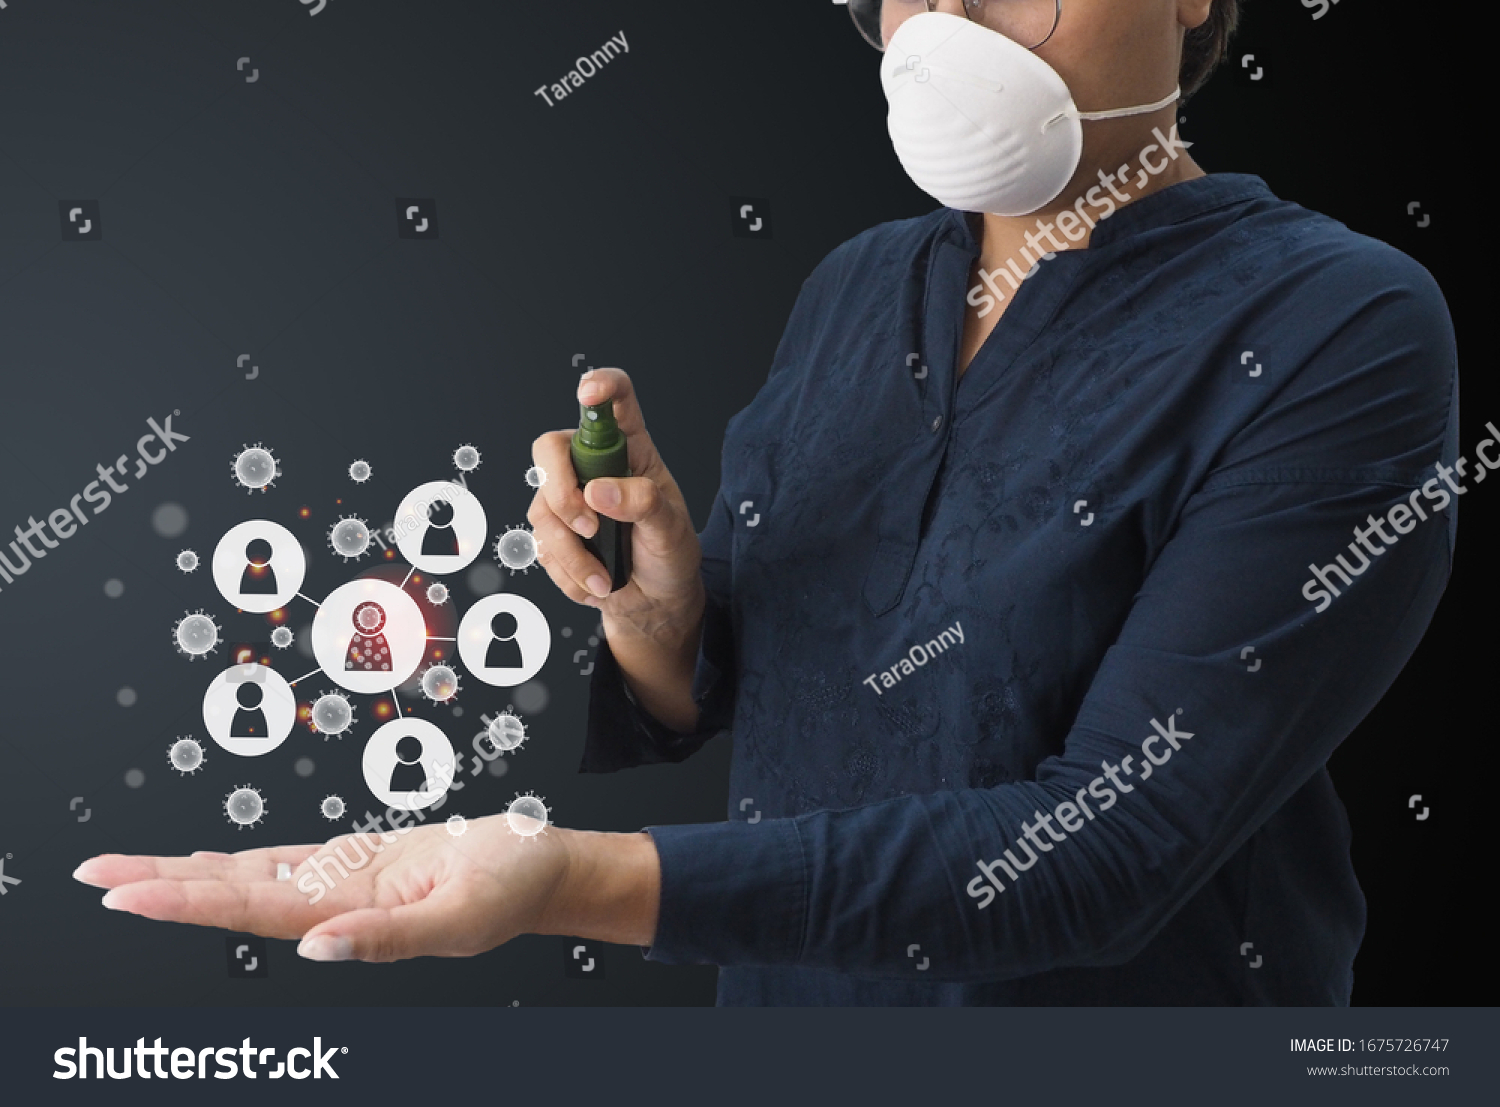 Women spray 70% alcohol on the left hand side To inhibit the virus by the graphic showing the infection Covid-19 from person to person. #1675726747